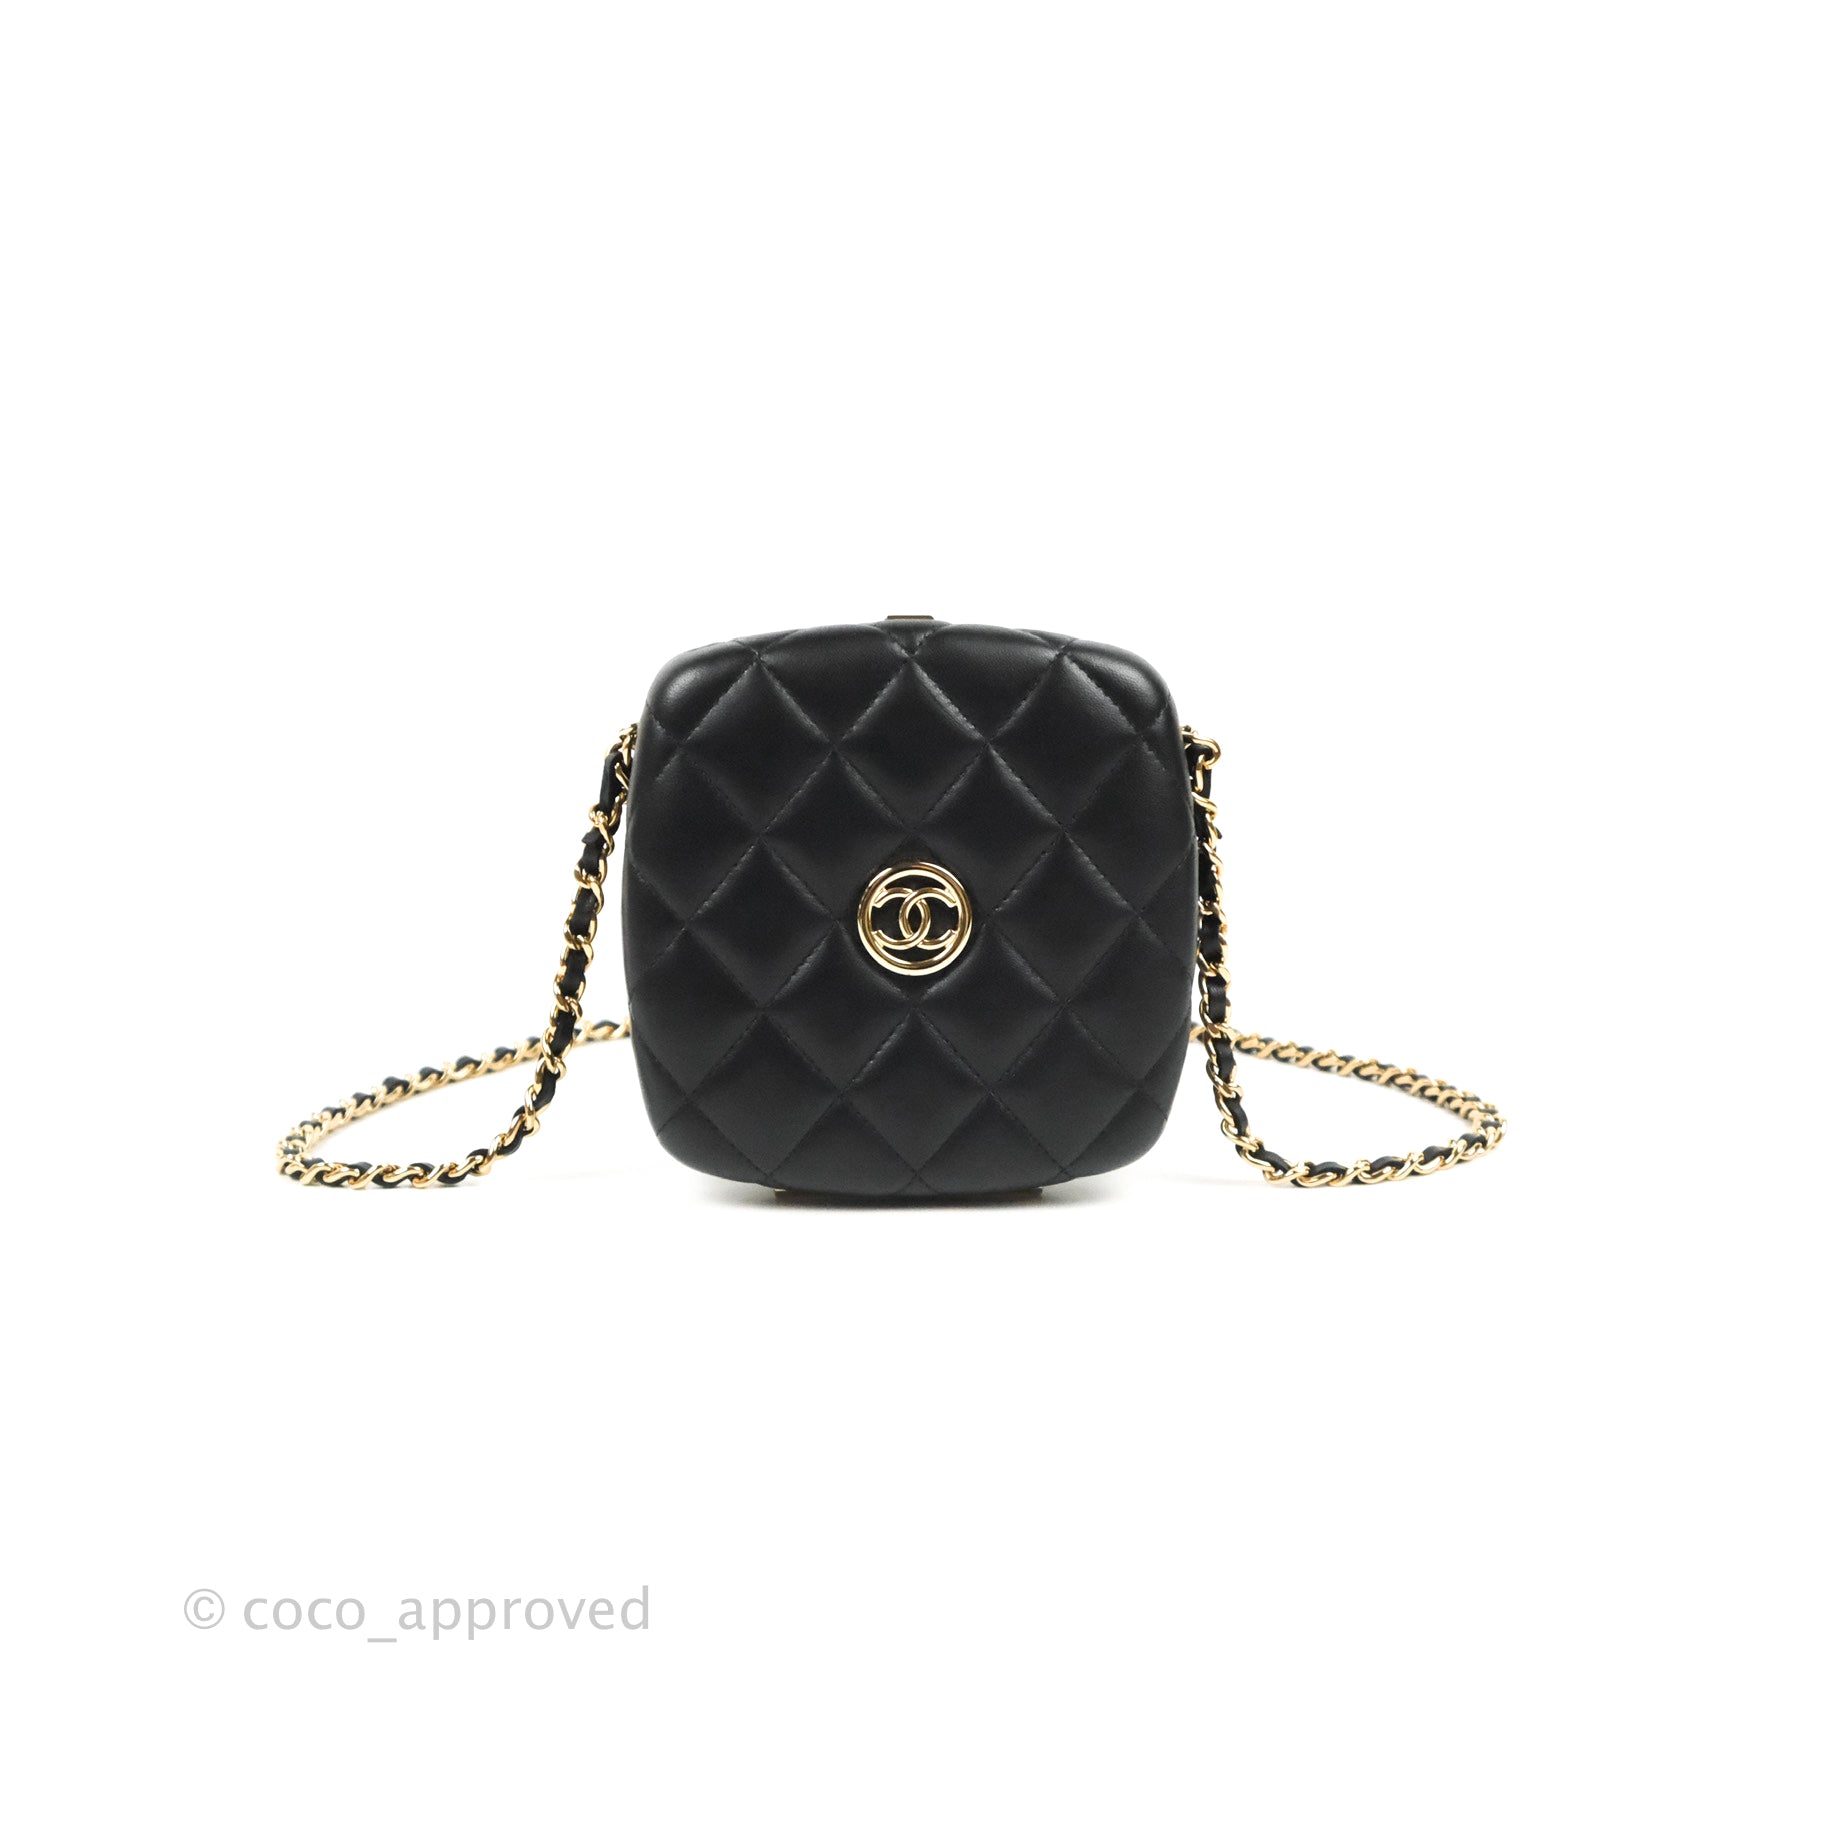 At Auction: Chanel black quilted lambskin front pocket handbag